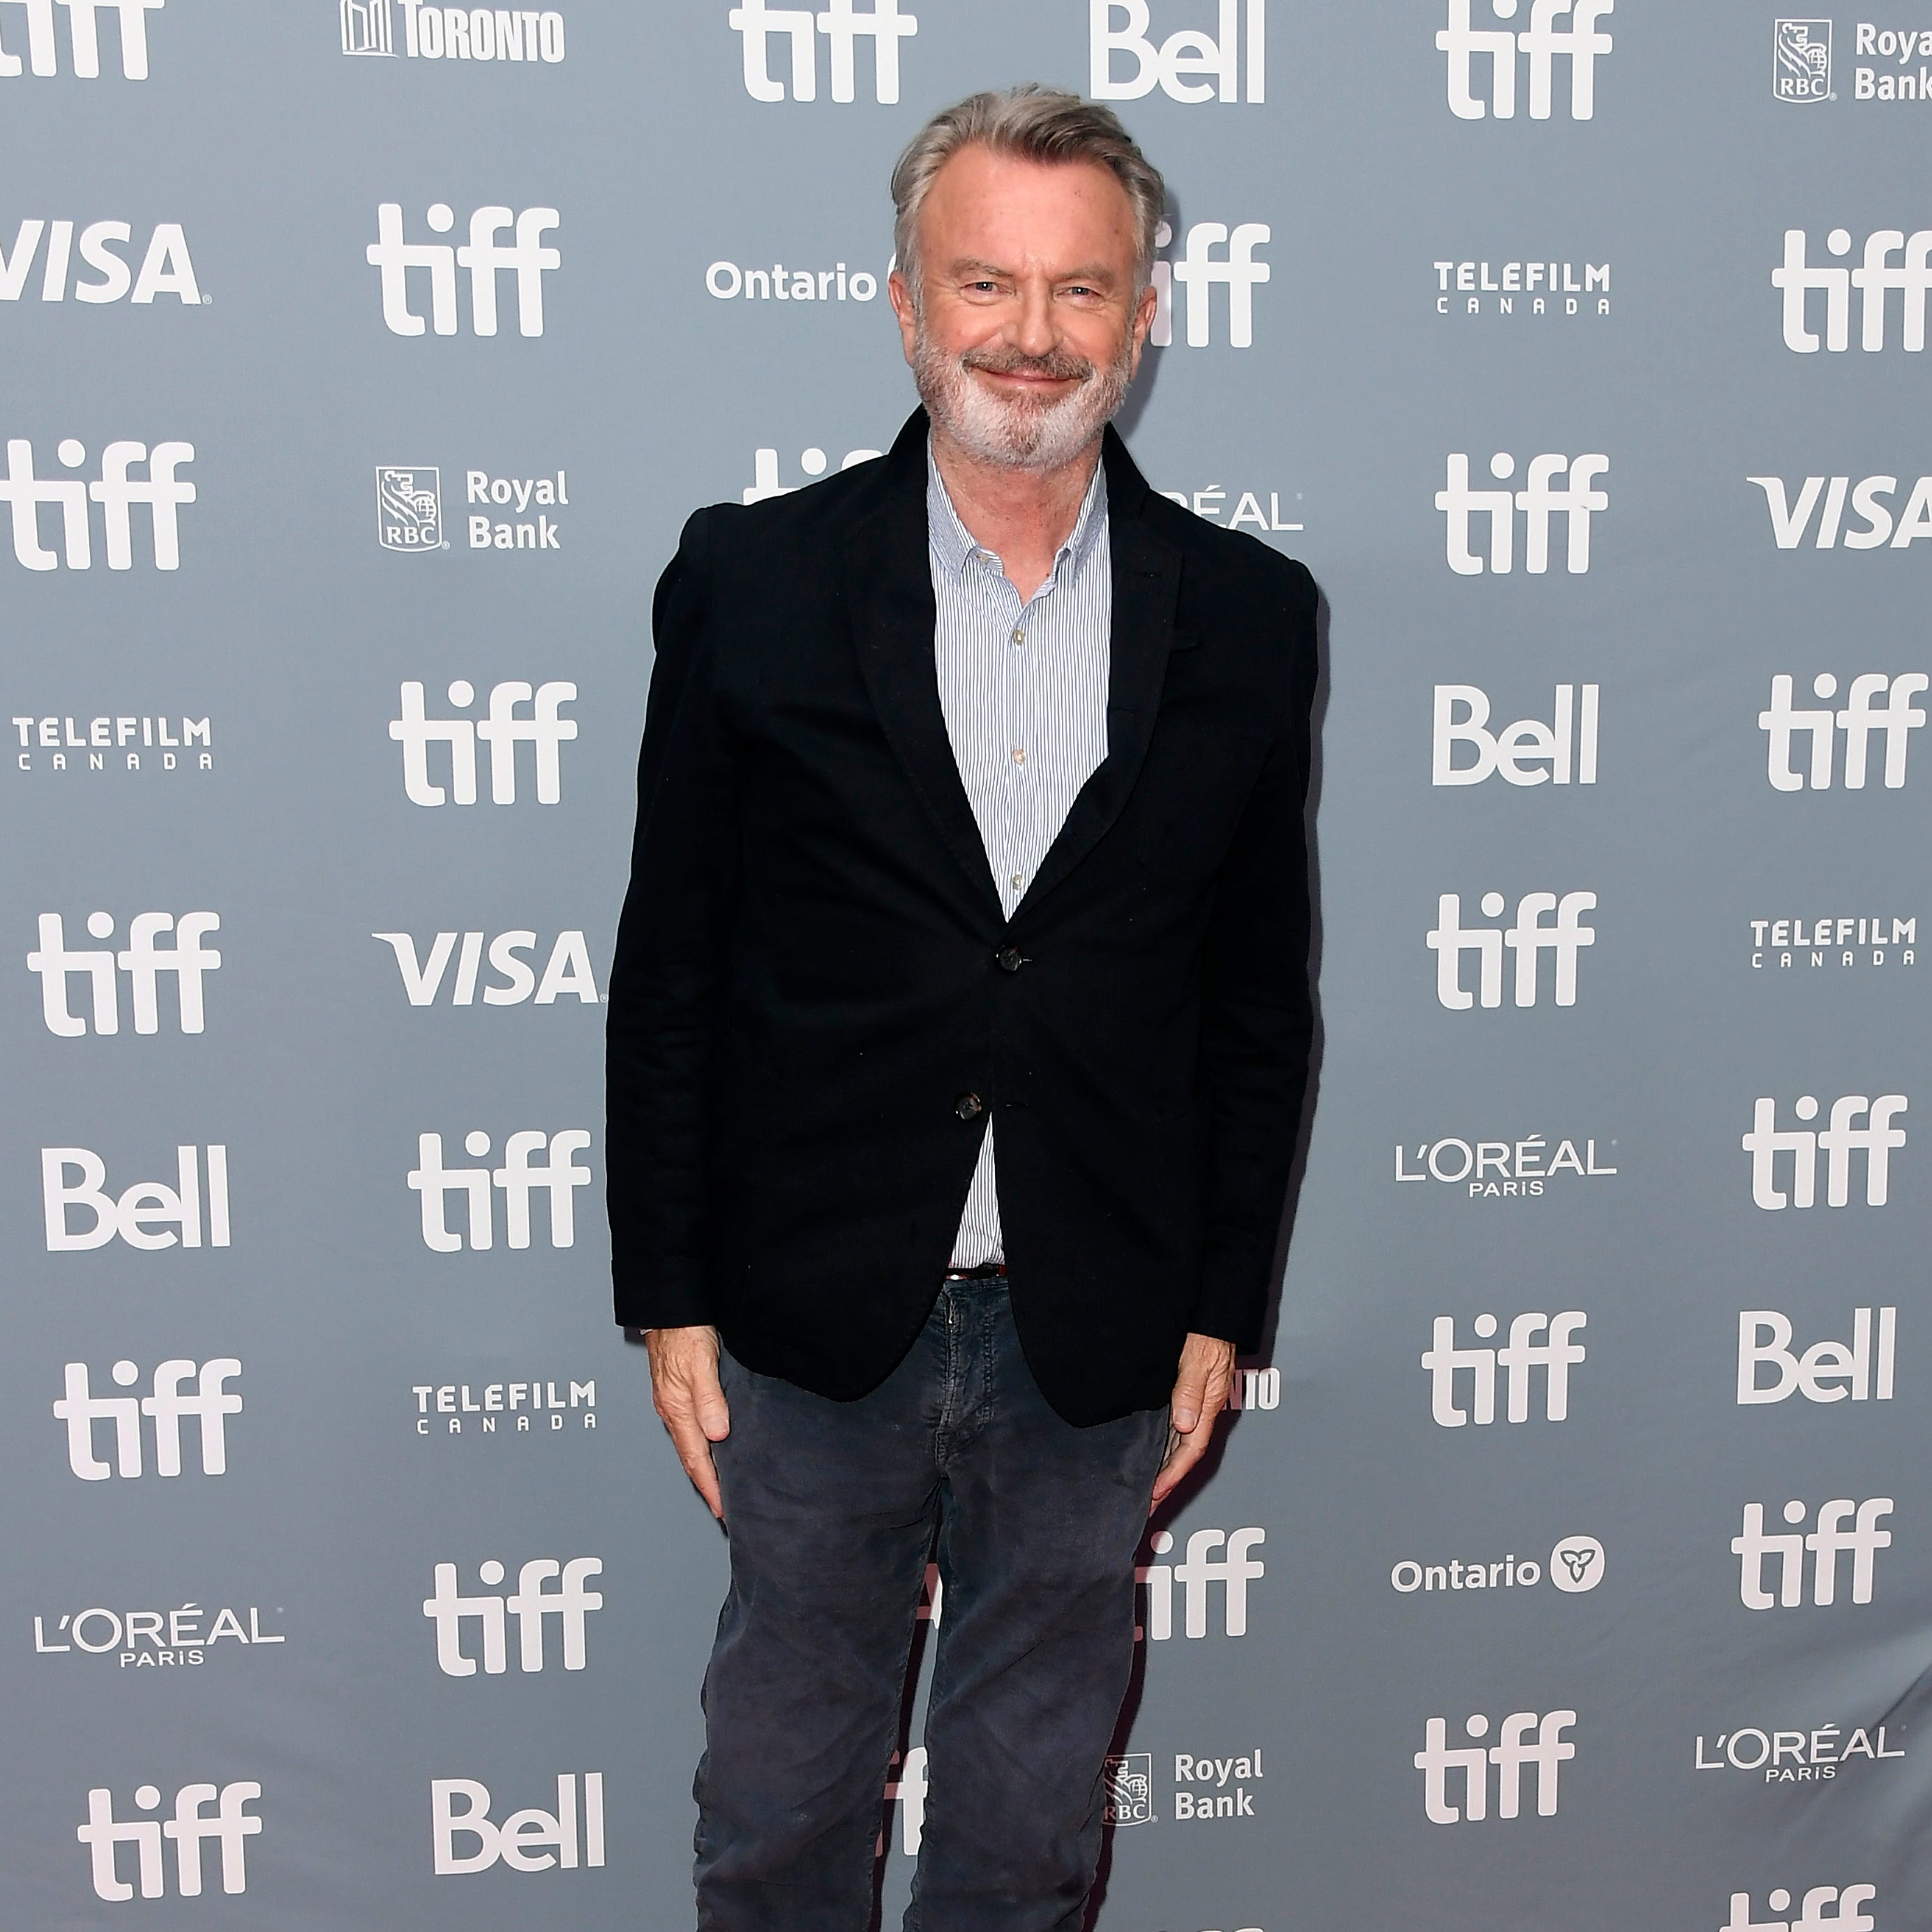 TORONTO, ONTARIO - SEPTEMBER 06: Sam Neill attends the "Blackbird" press conference during the 2019 Toronto International Film Festival at TIFF Bell Lightbox on September 06, 2019 in Toronto, Canada. (Photo by Frazer Harrison/Getty Images) ORG XMIT: 775397605 ORIG FILE ID: 1172811642